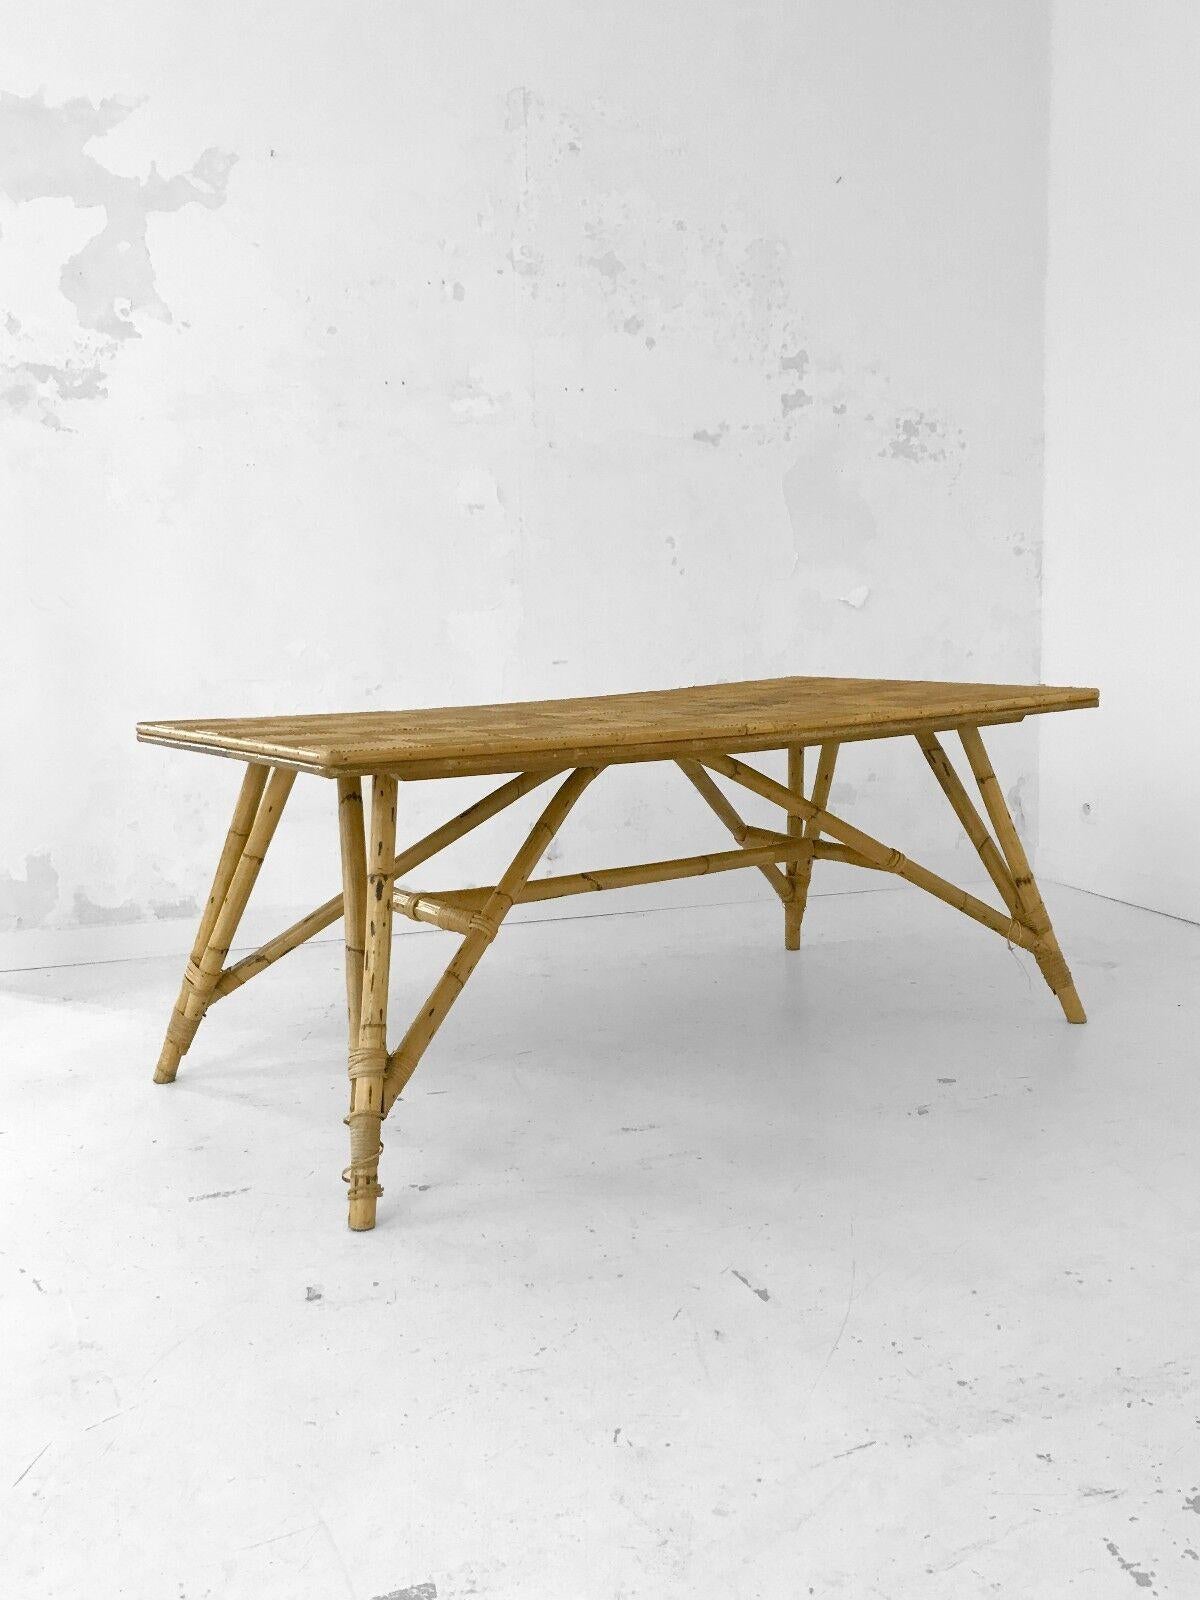 Space Age A MID-CENTURY-MODERN BRUTALIST Dining TABLE by AUDOUX-MINNET, France 1950 For Sale